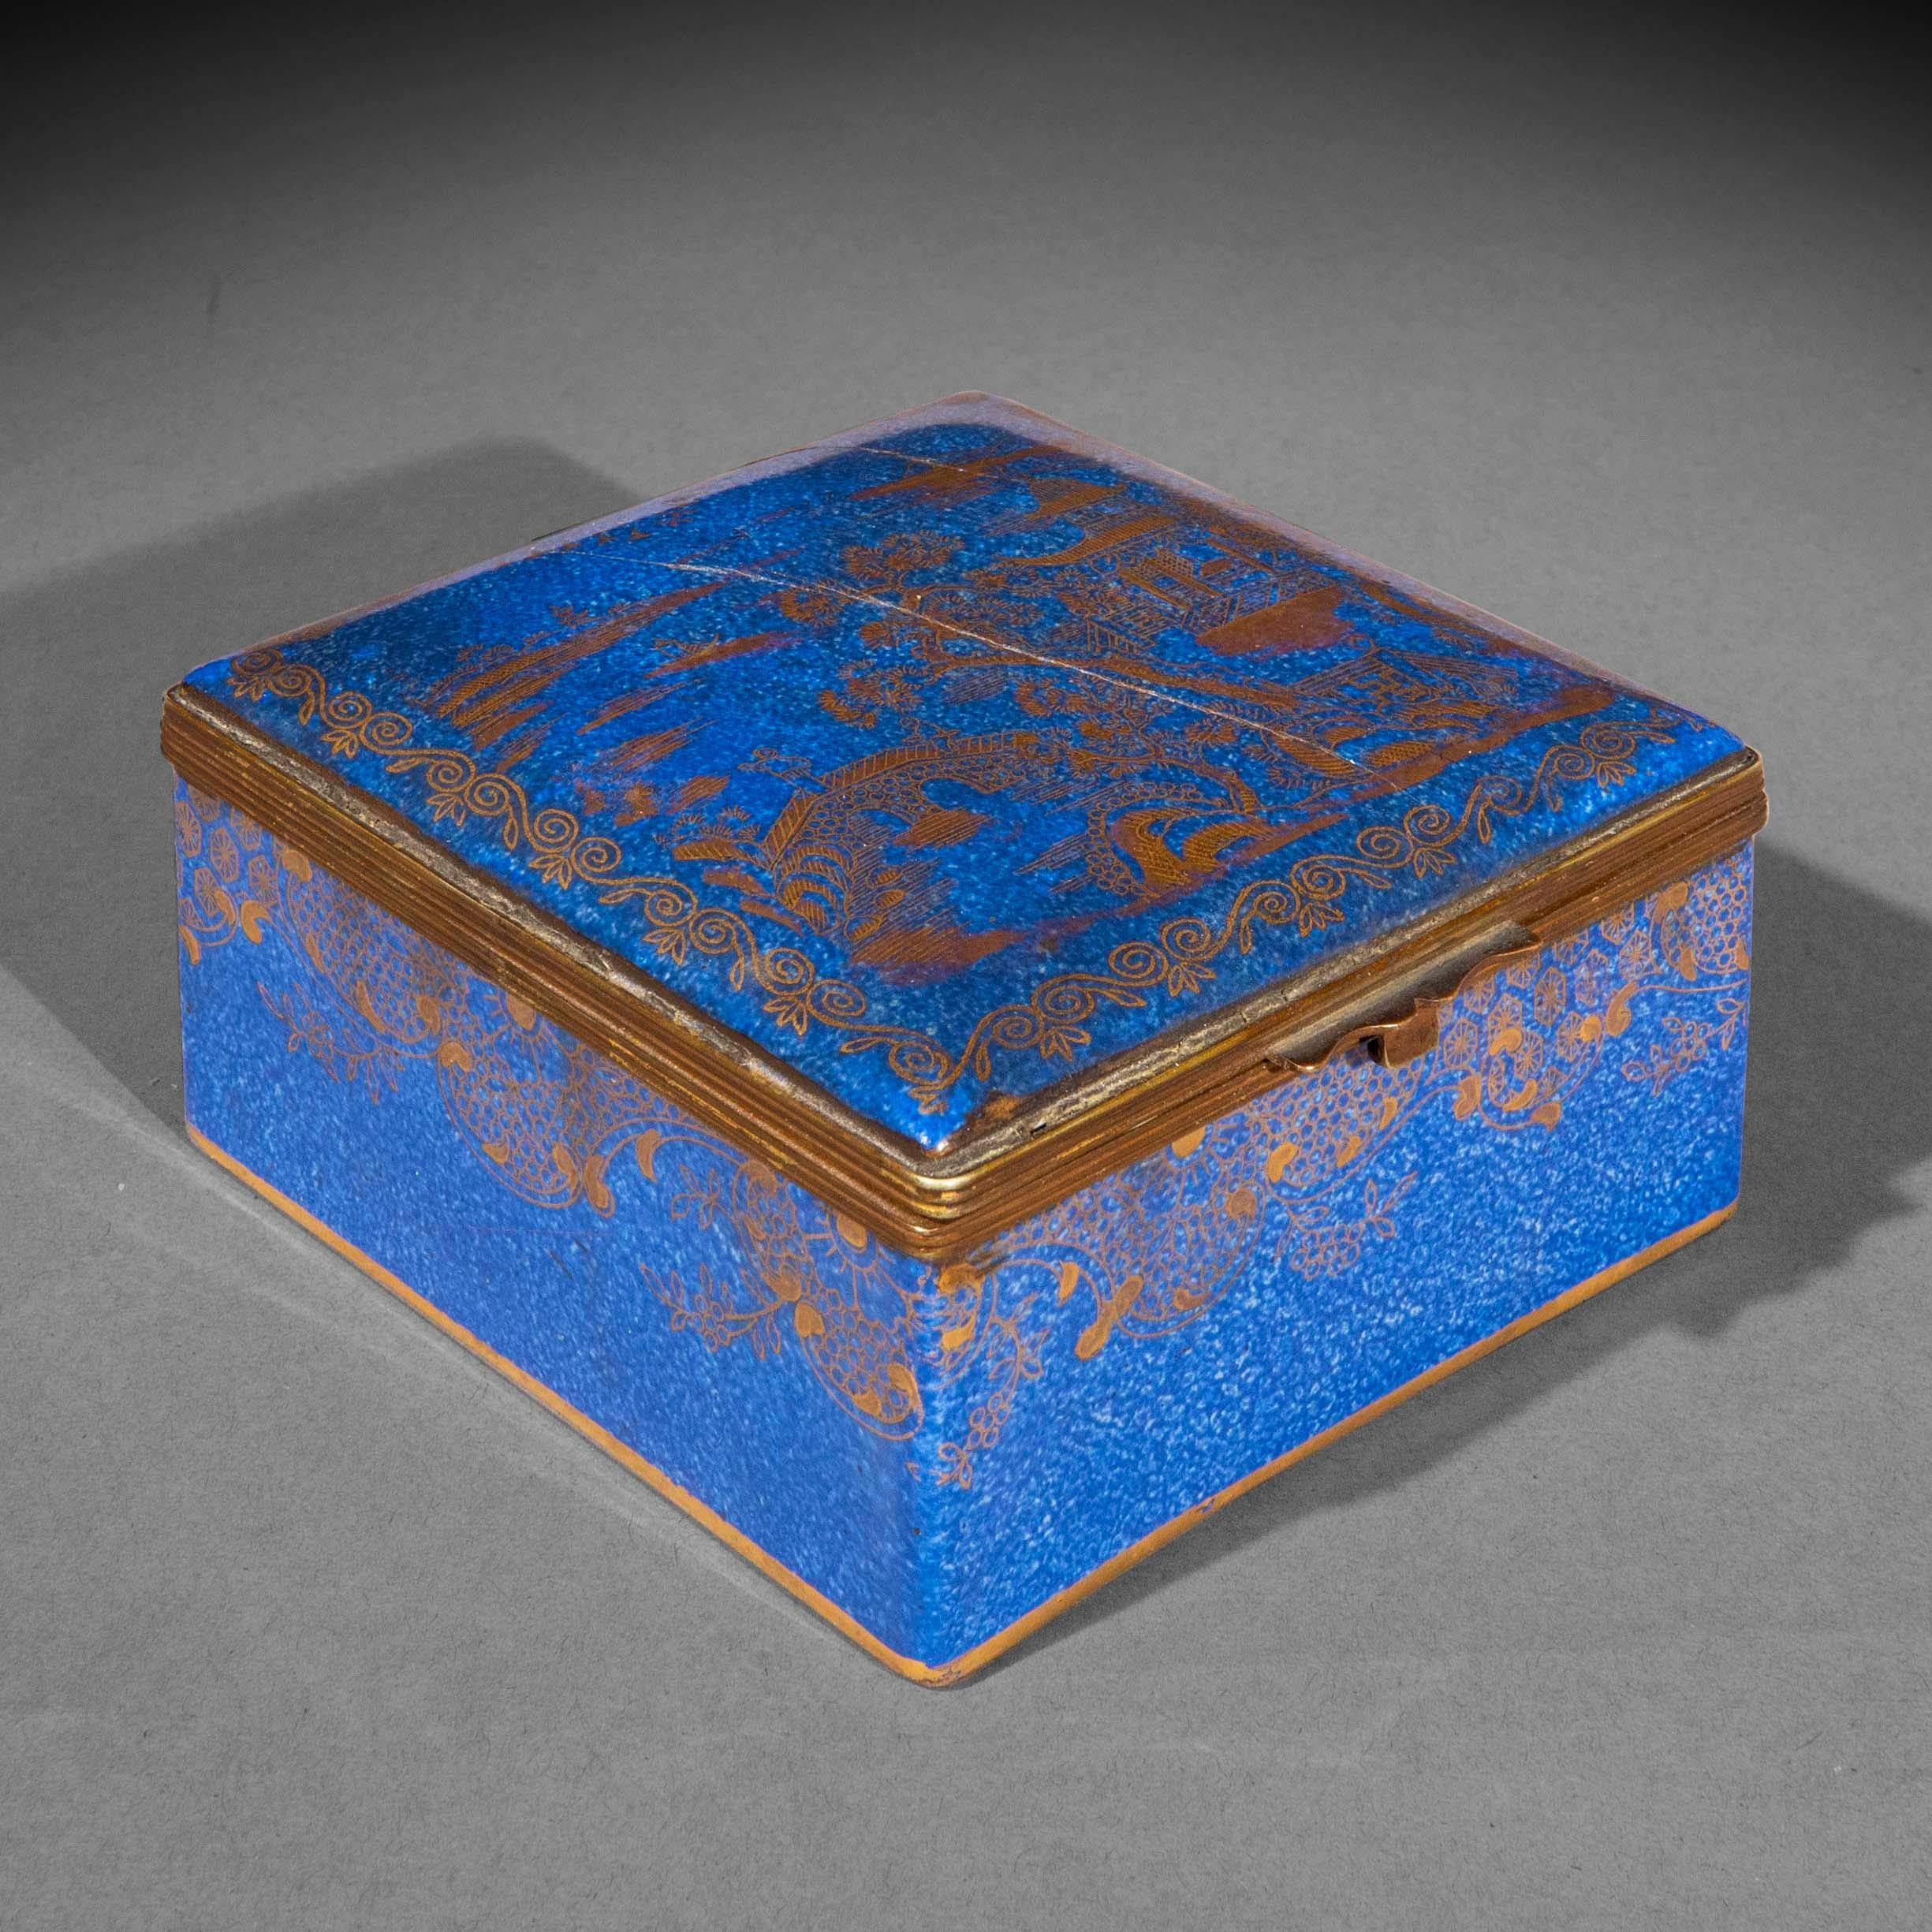 English Antique Chinoiserie Blue Staffordshire Porcelain Box For Sale